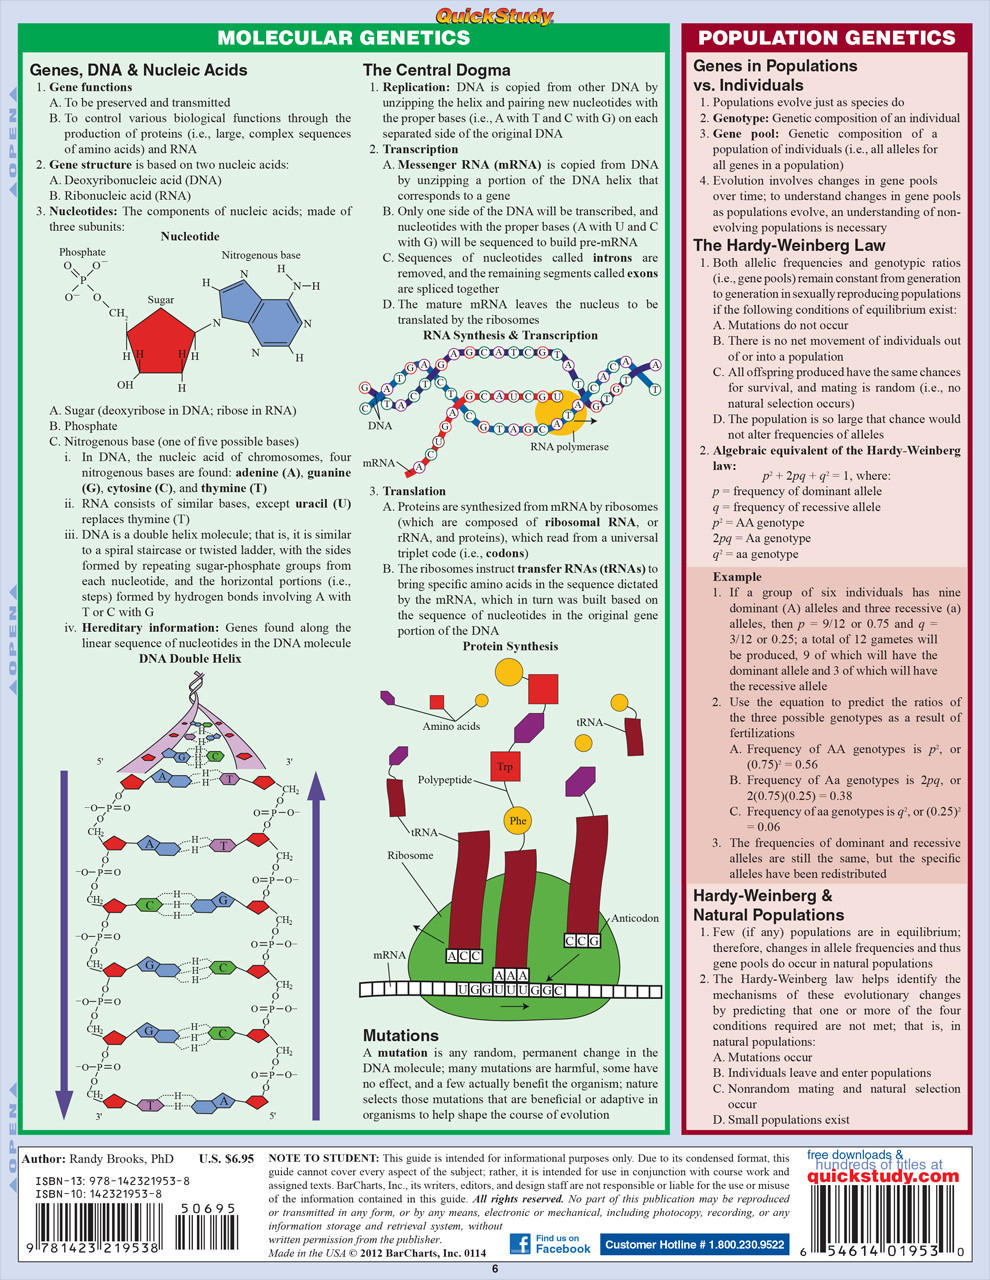 Multicellular Biology Guide - Laminated Biology Quick Reference Guide by  Permacharts